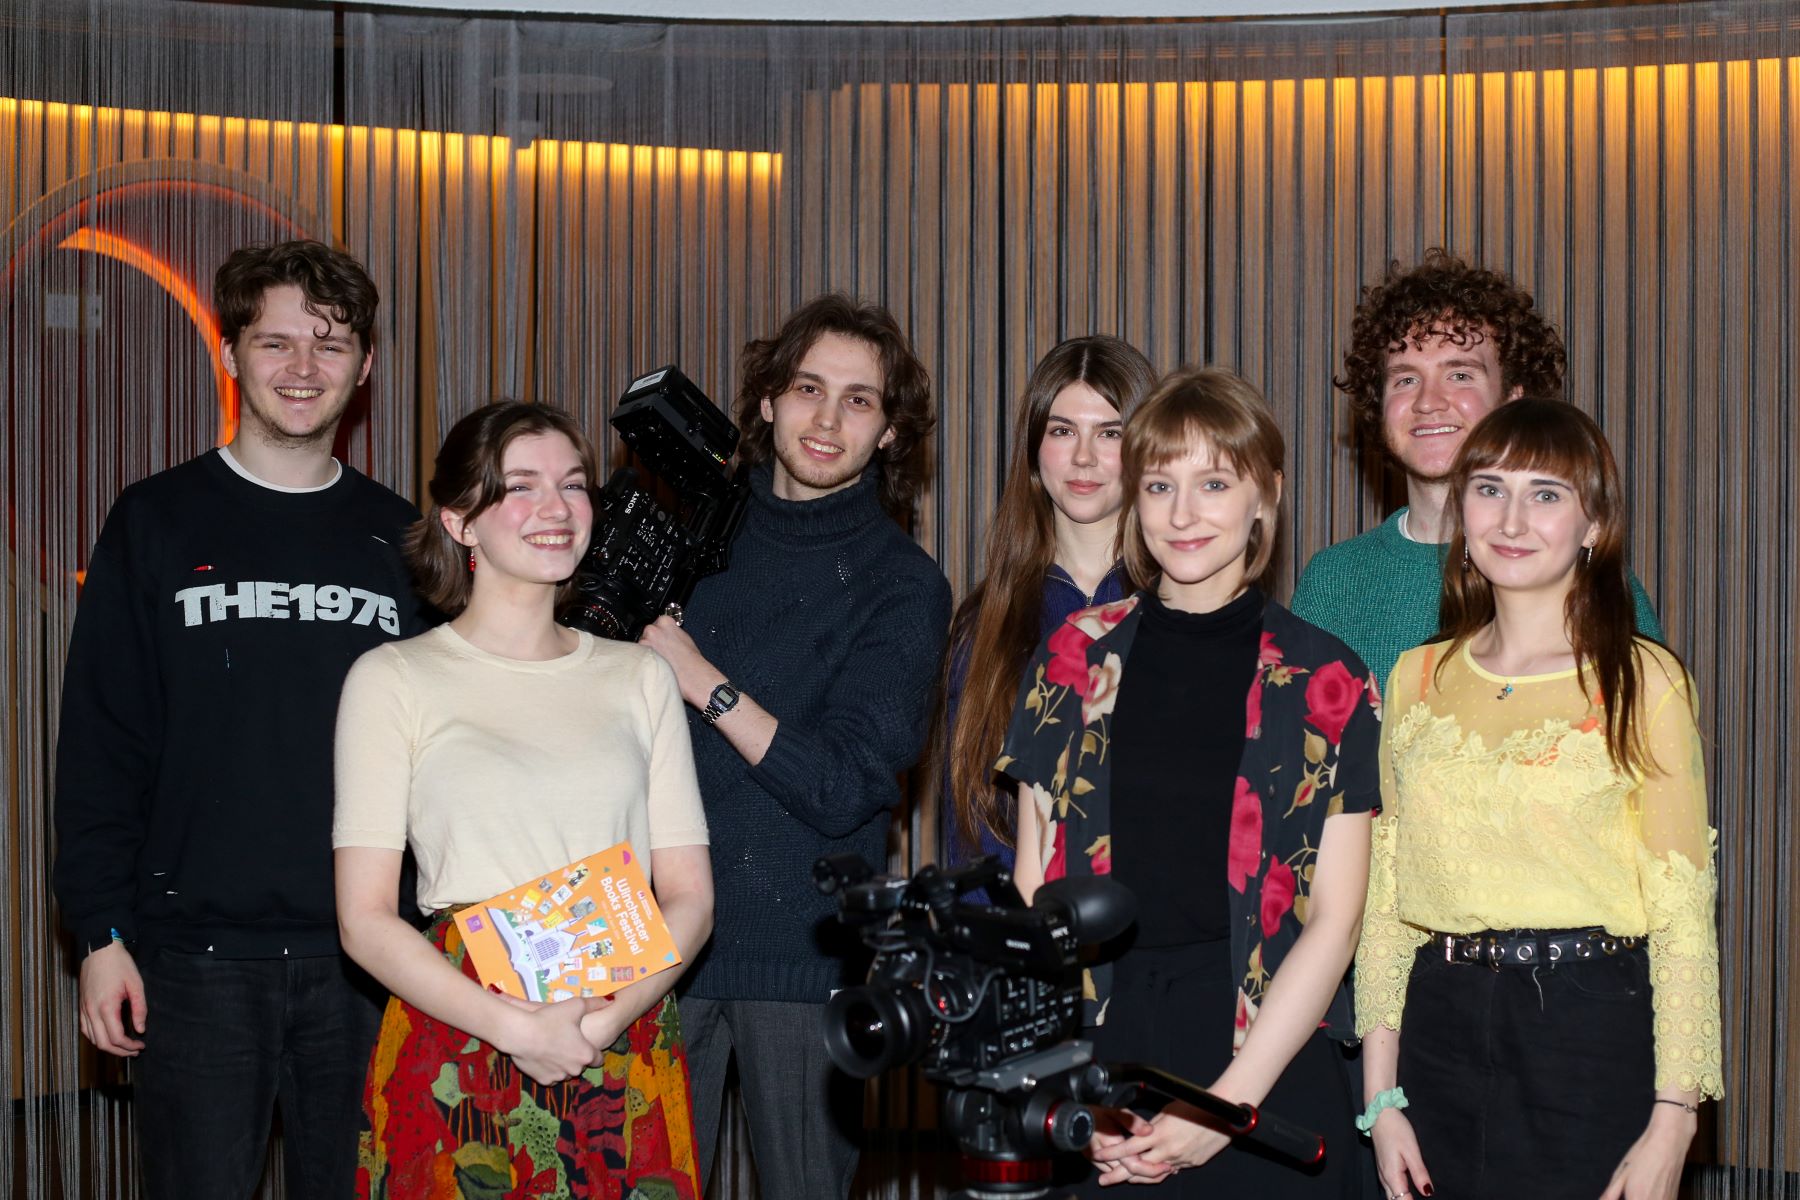 Young people with camera equipment